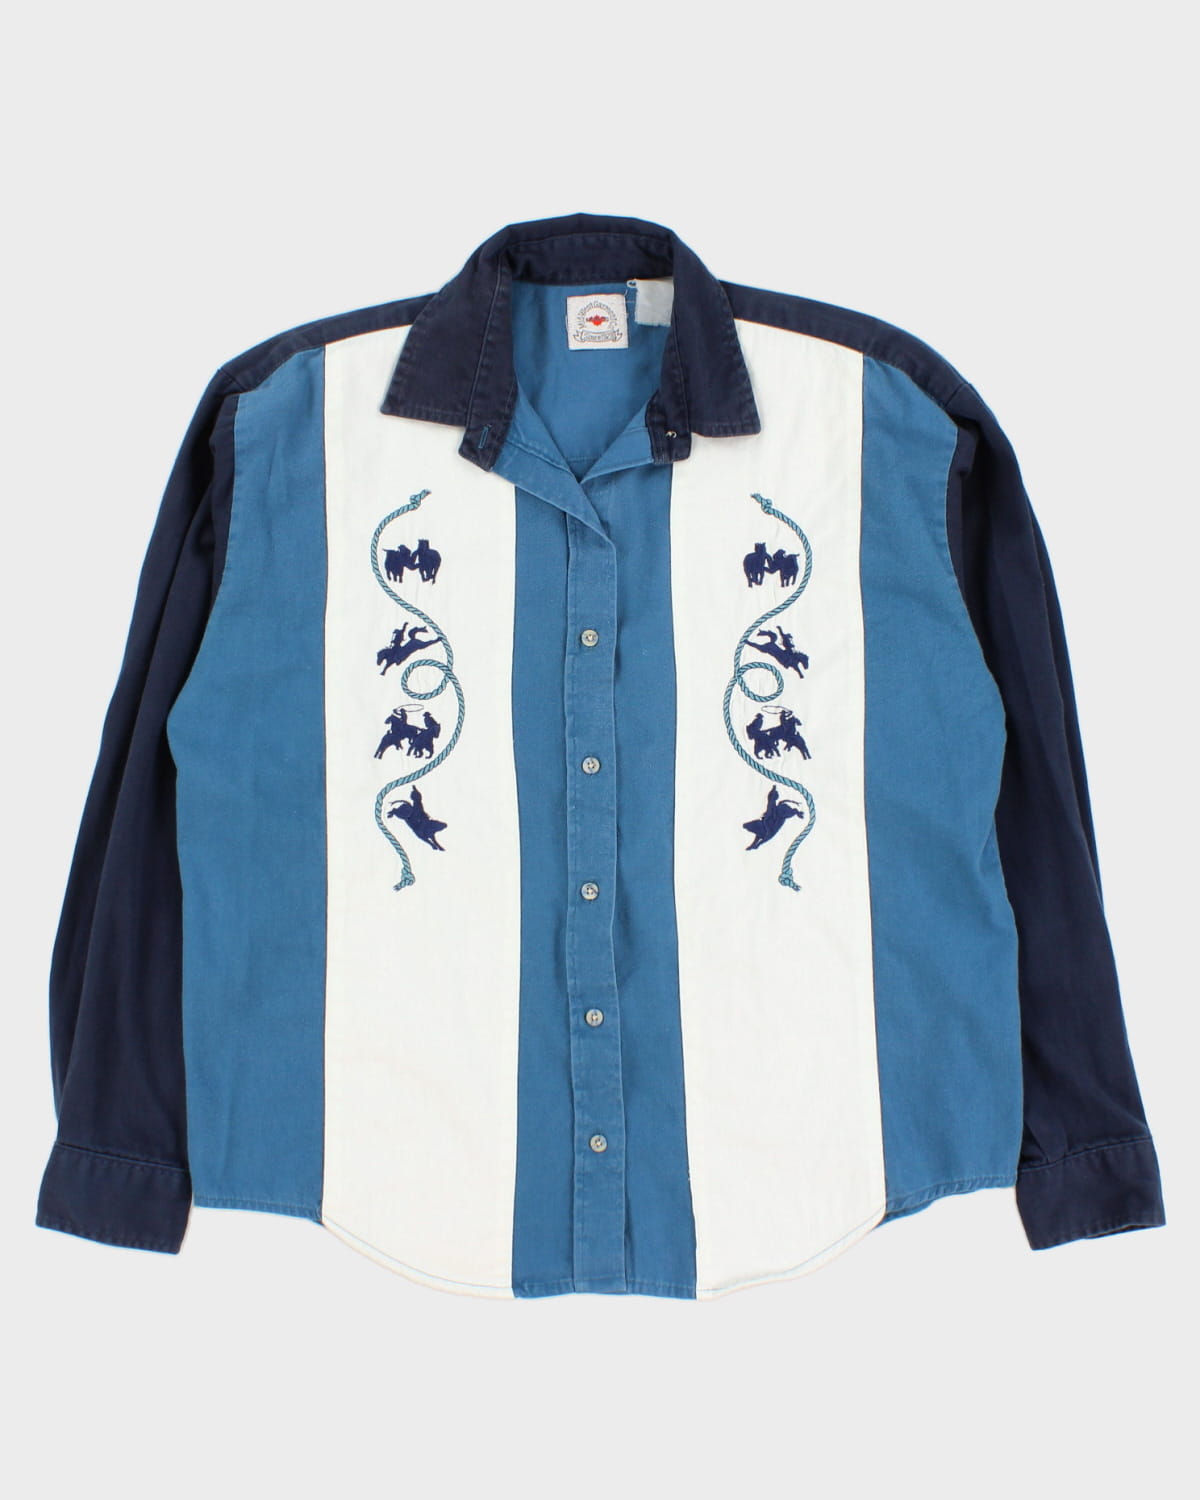 Vintage 70s Midwest Garment Co Embroidered Shirt - L